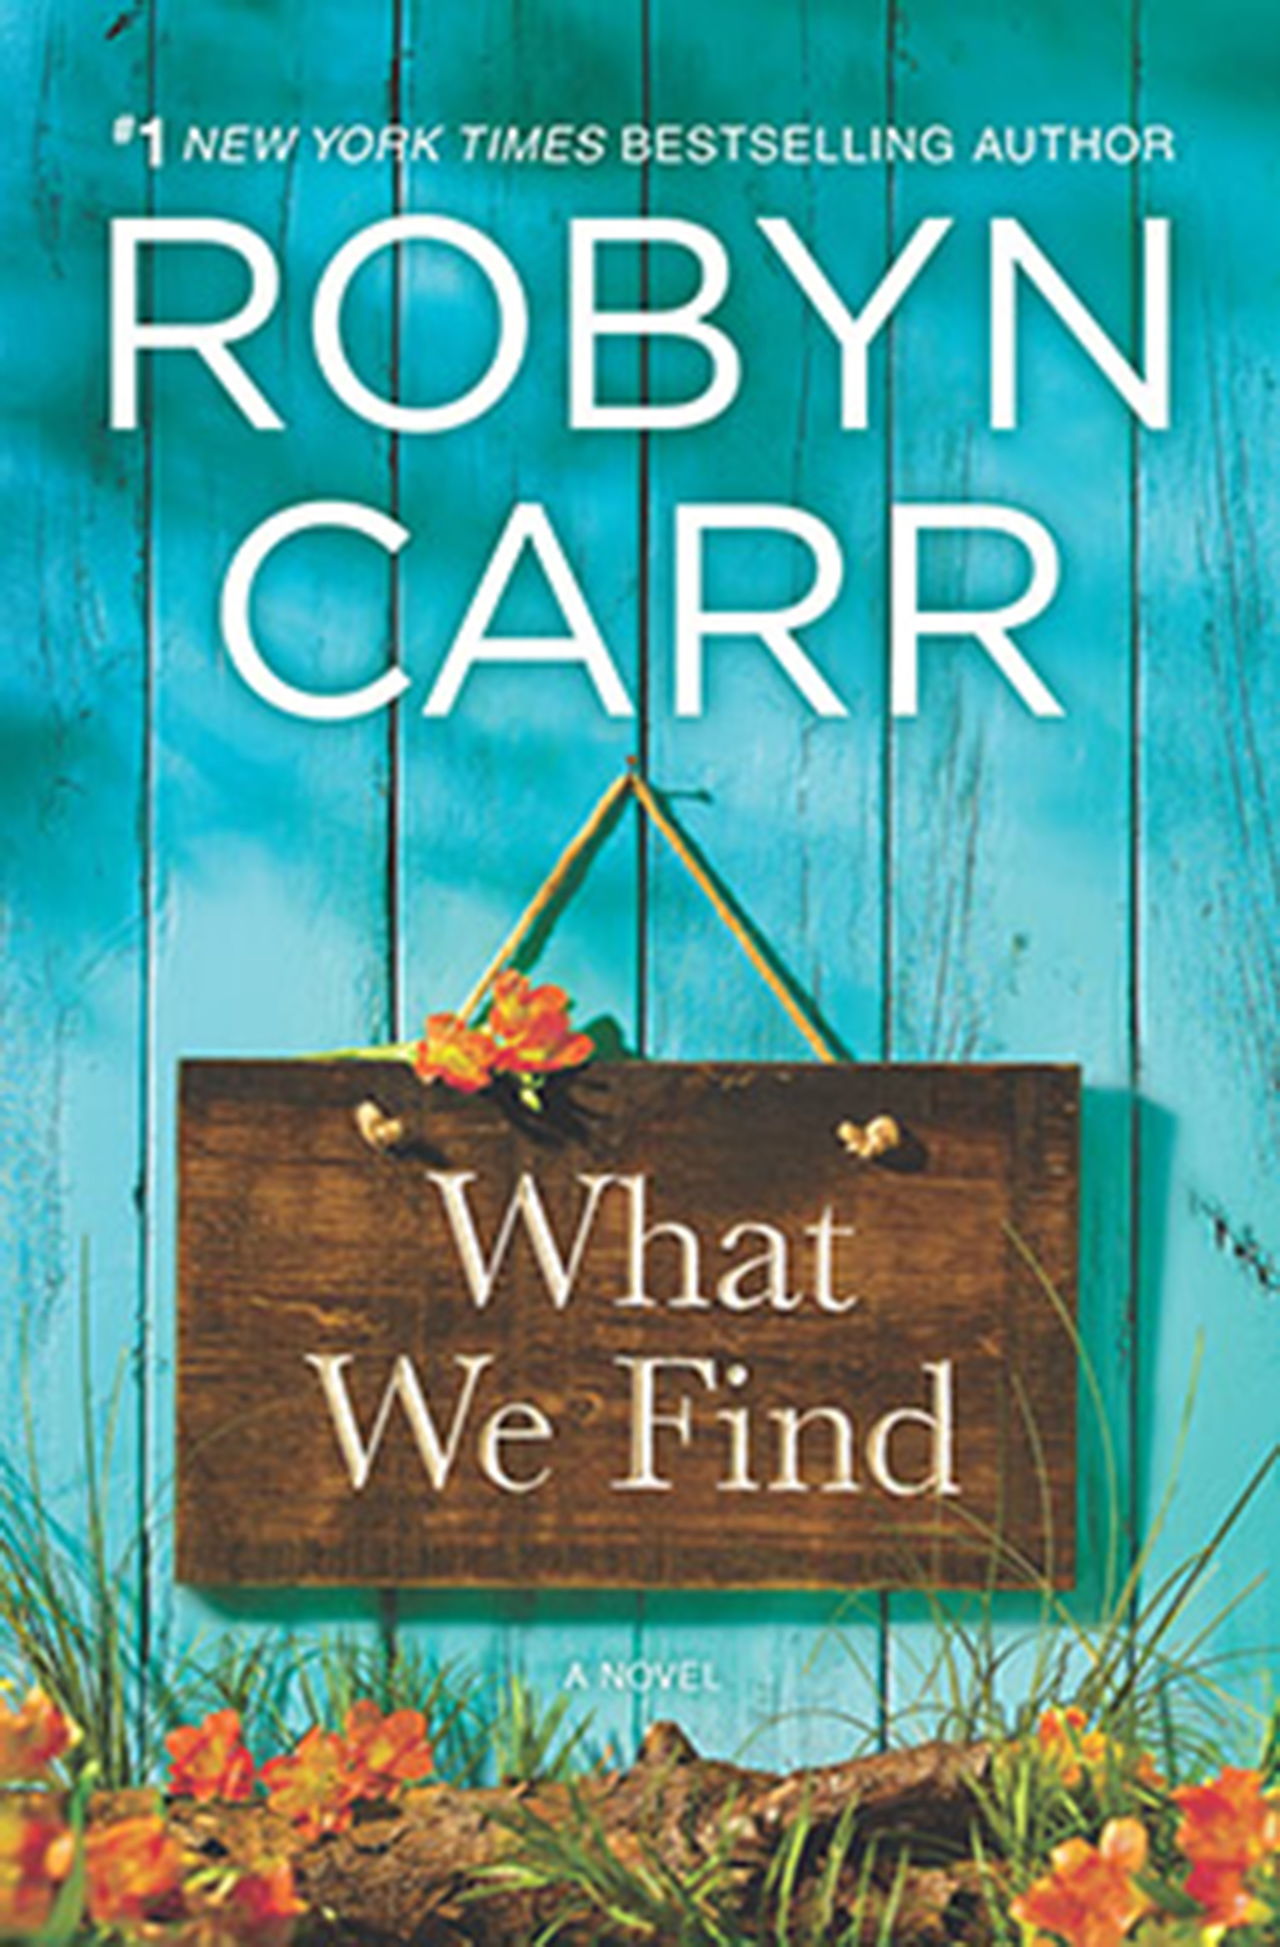 “What We Find”by Robyn Carr.